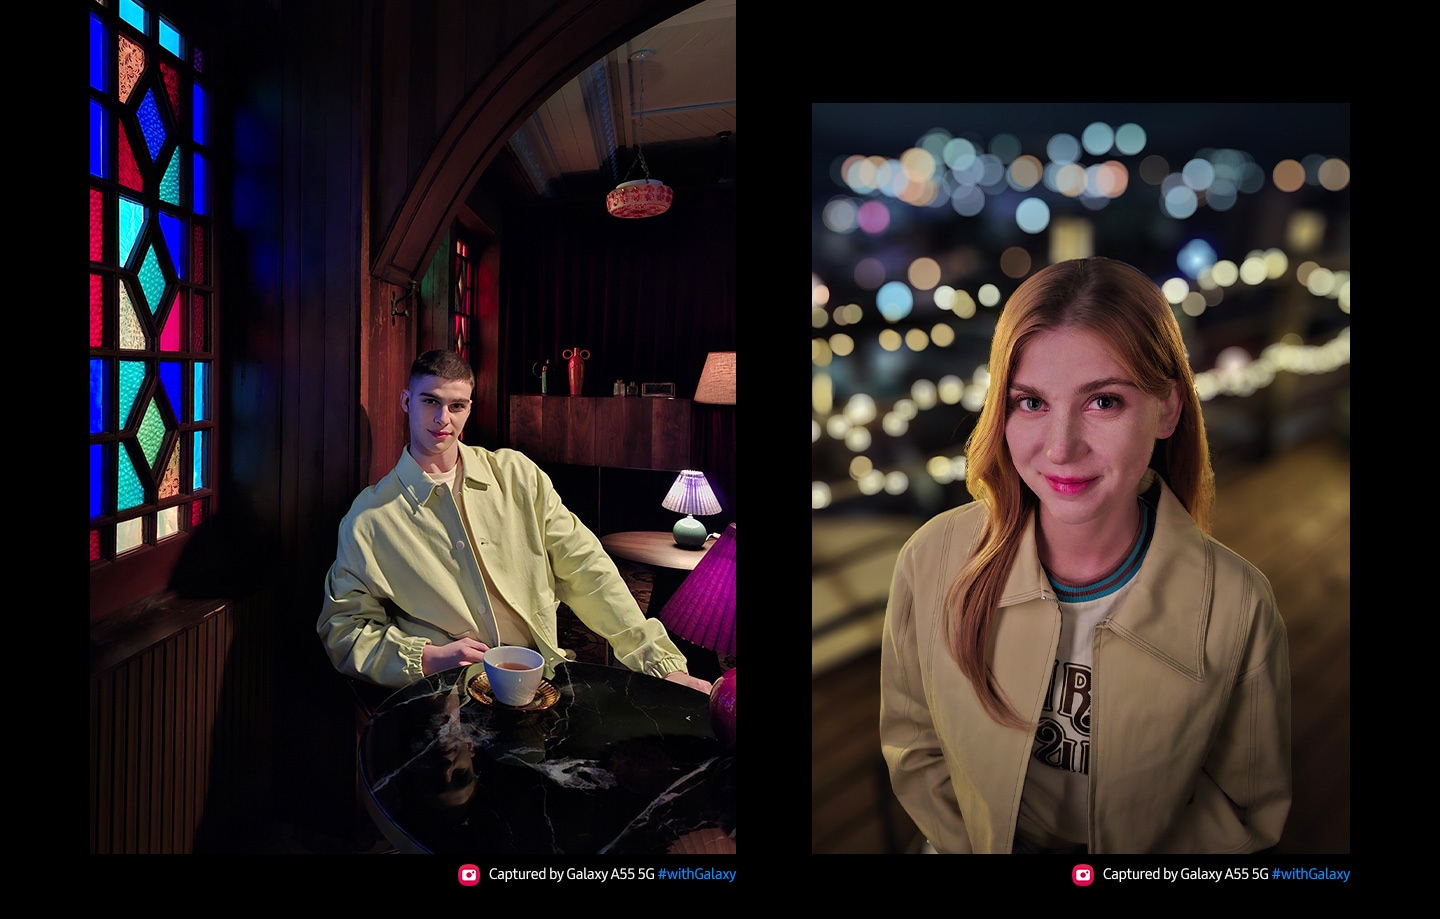 Two portraits in low-light conditions. First portrait taken with night mode: A person seated indoors by a table, with colorful stained glass windows in the background. Second portrait taken with portrait mode in low-light condition: A person standing outdoors at night, with a backdrop of soft, blurred city lights. Text reads Captured by Galaxy A55 5G #withGalaxy.